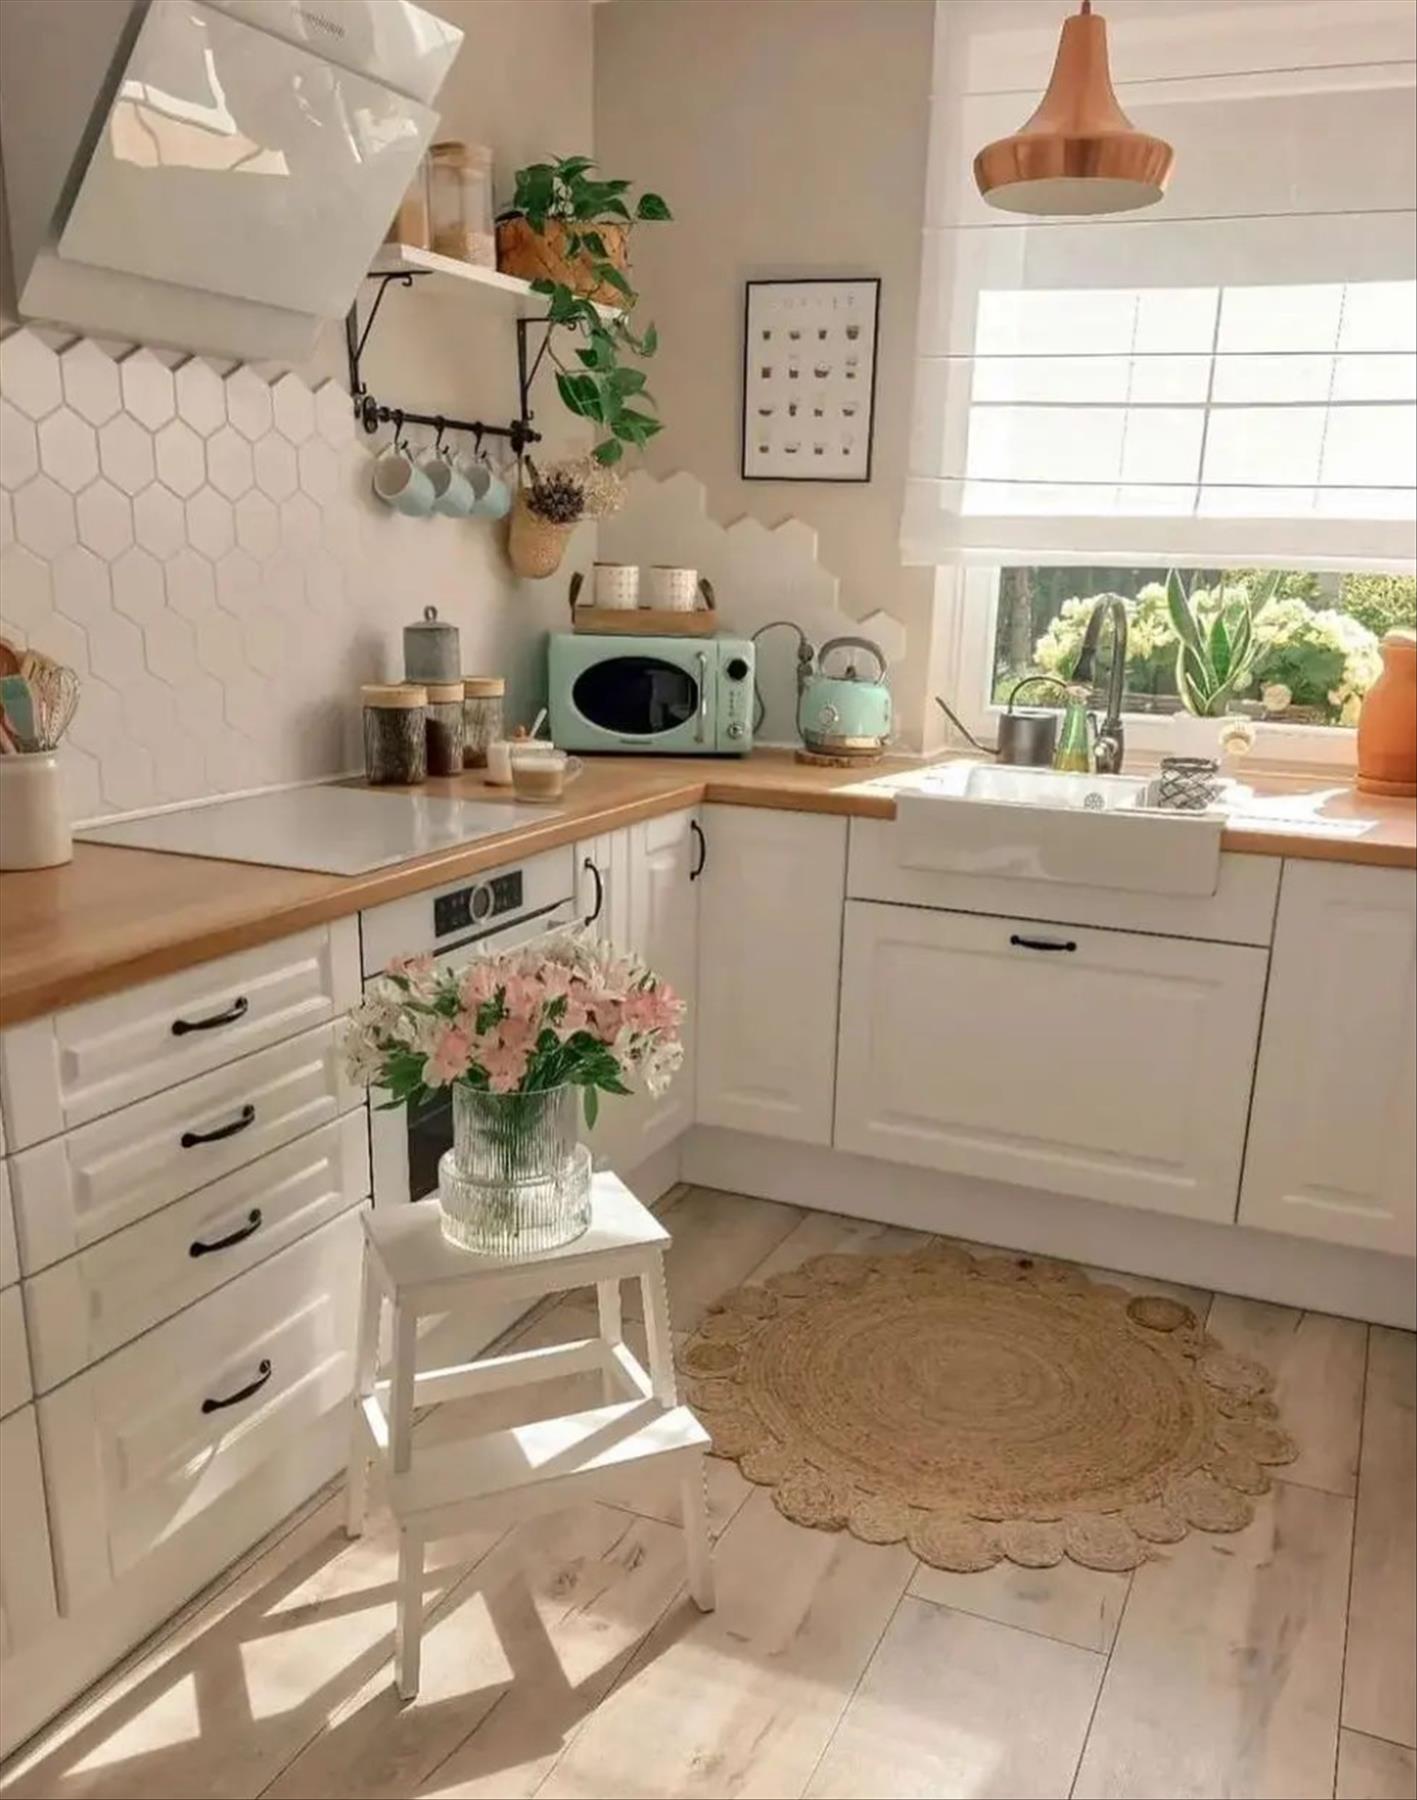 Inspiring spring kitchen decor ideas  easily for your home